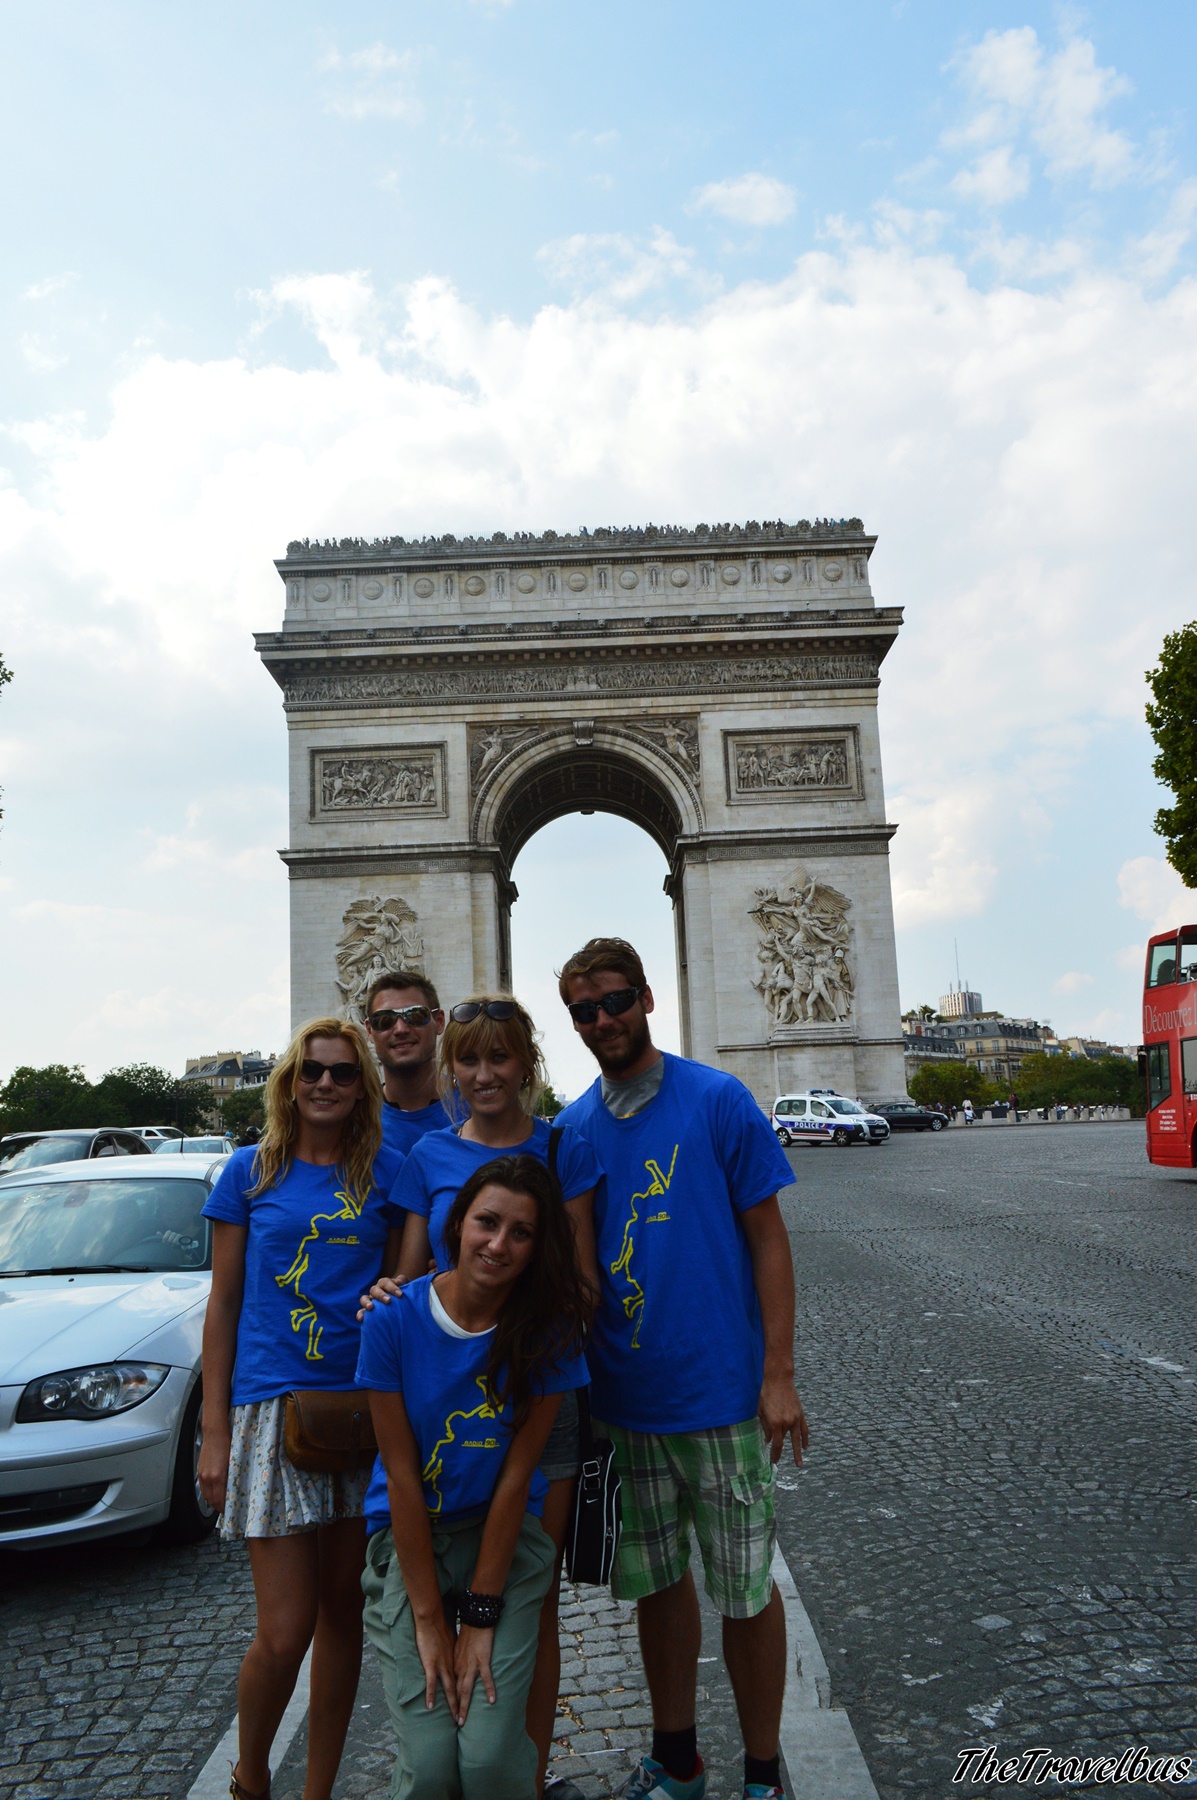 In the background, the Arc de Triomphe :)